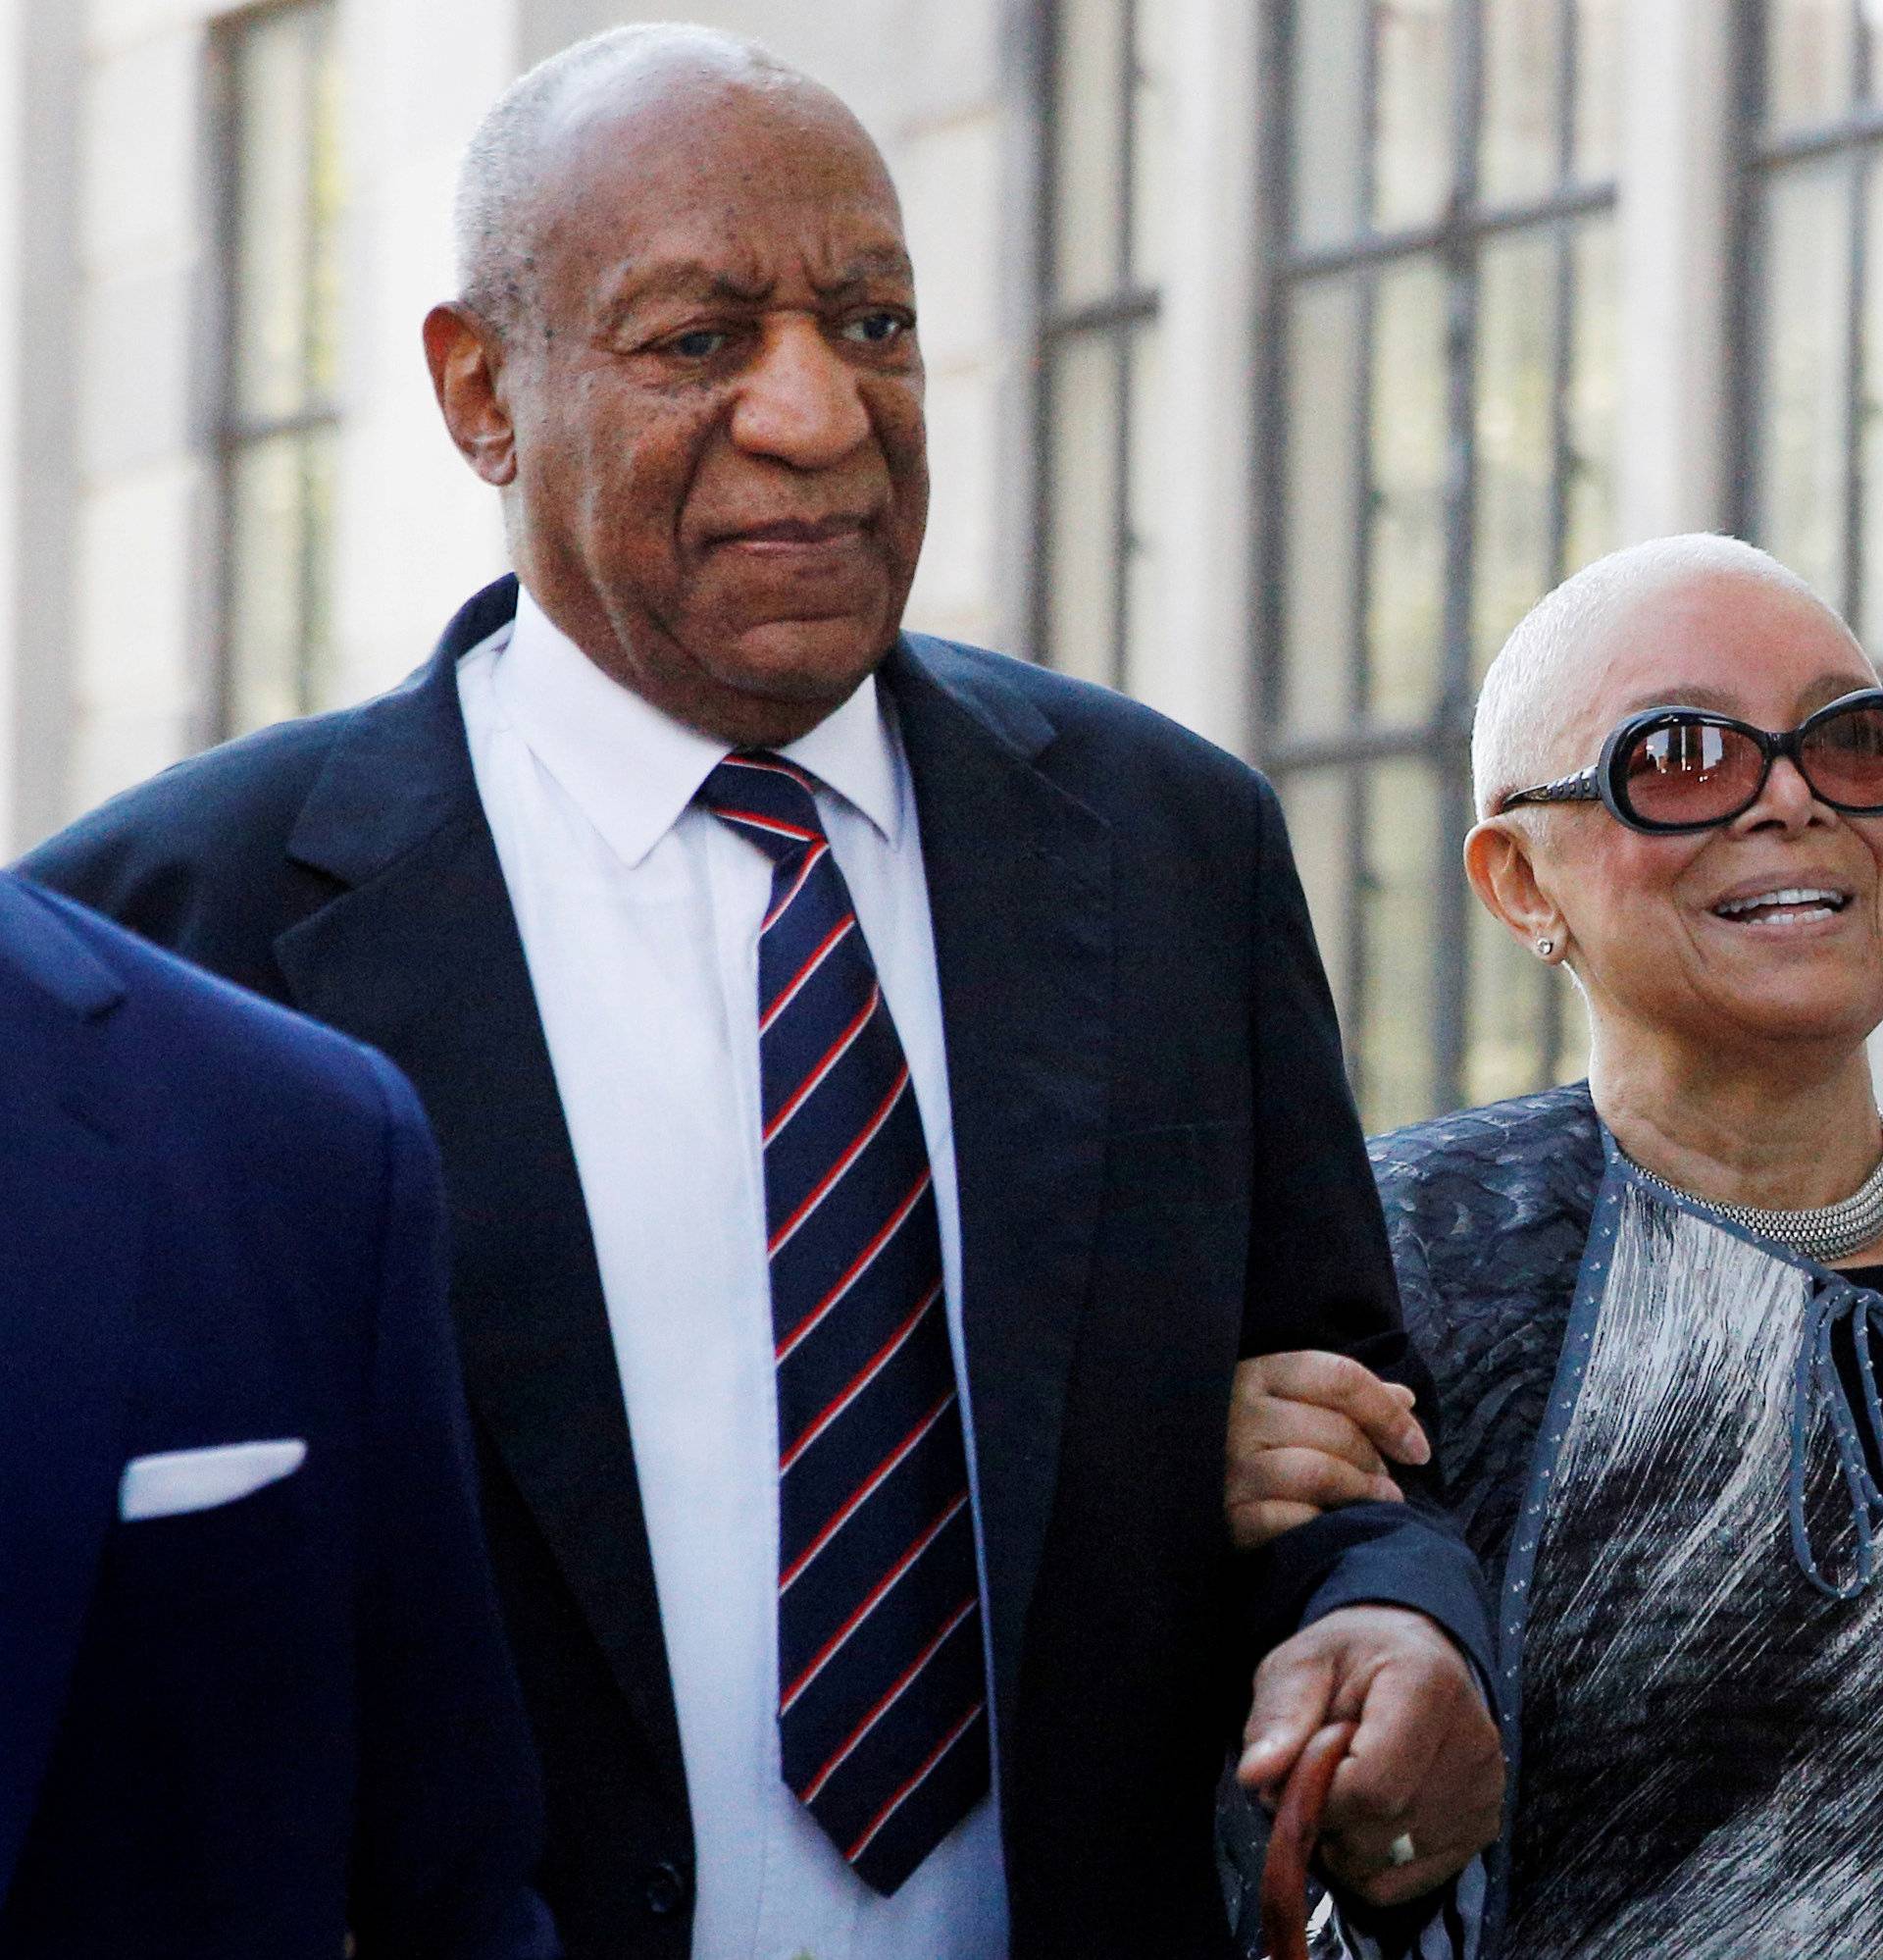 FILE PHOTO: Actor and comedian Bill Cosby arrives with his wife Camille for his sexual assault trial at the Montgomery County Courthouse in Norristown